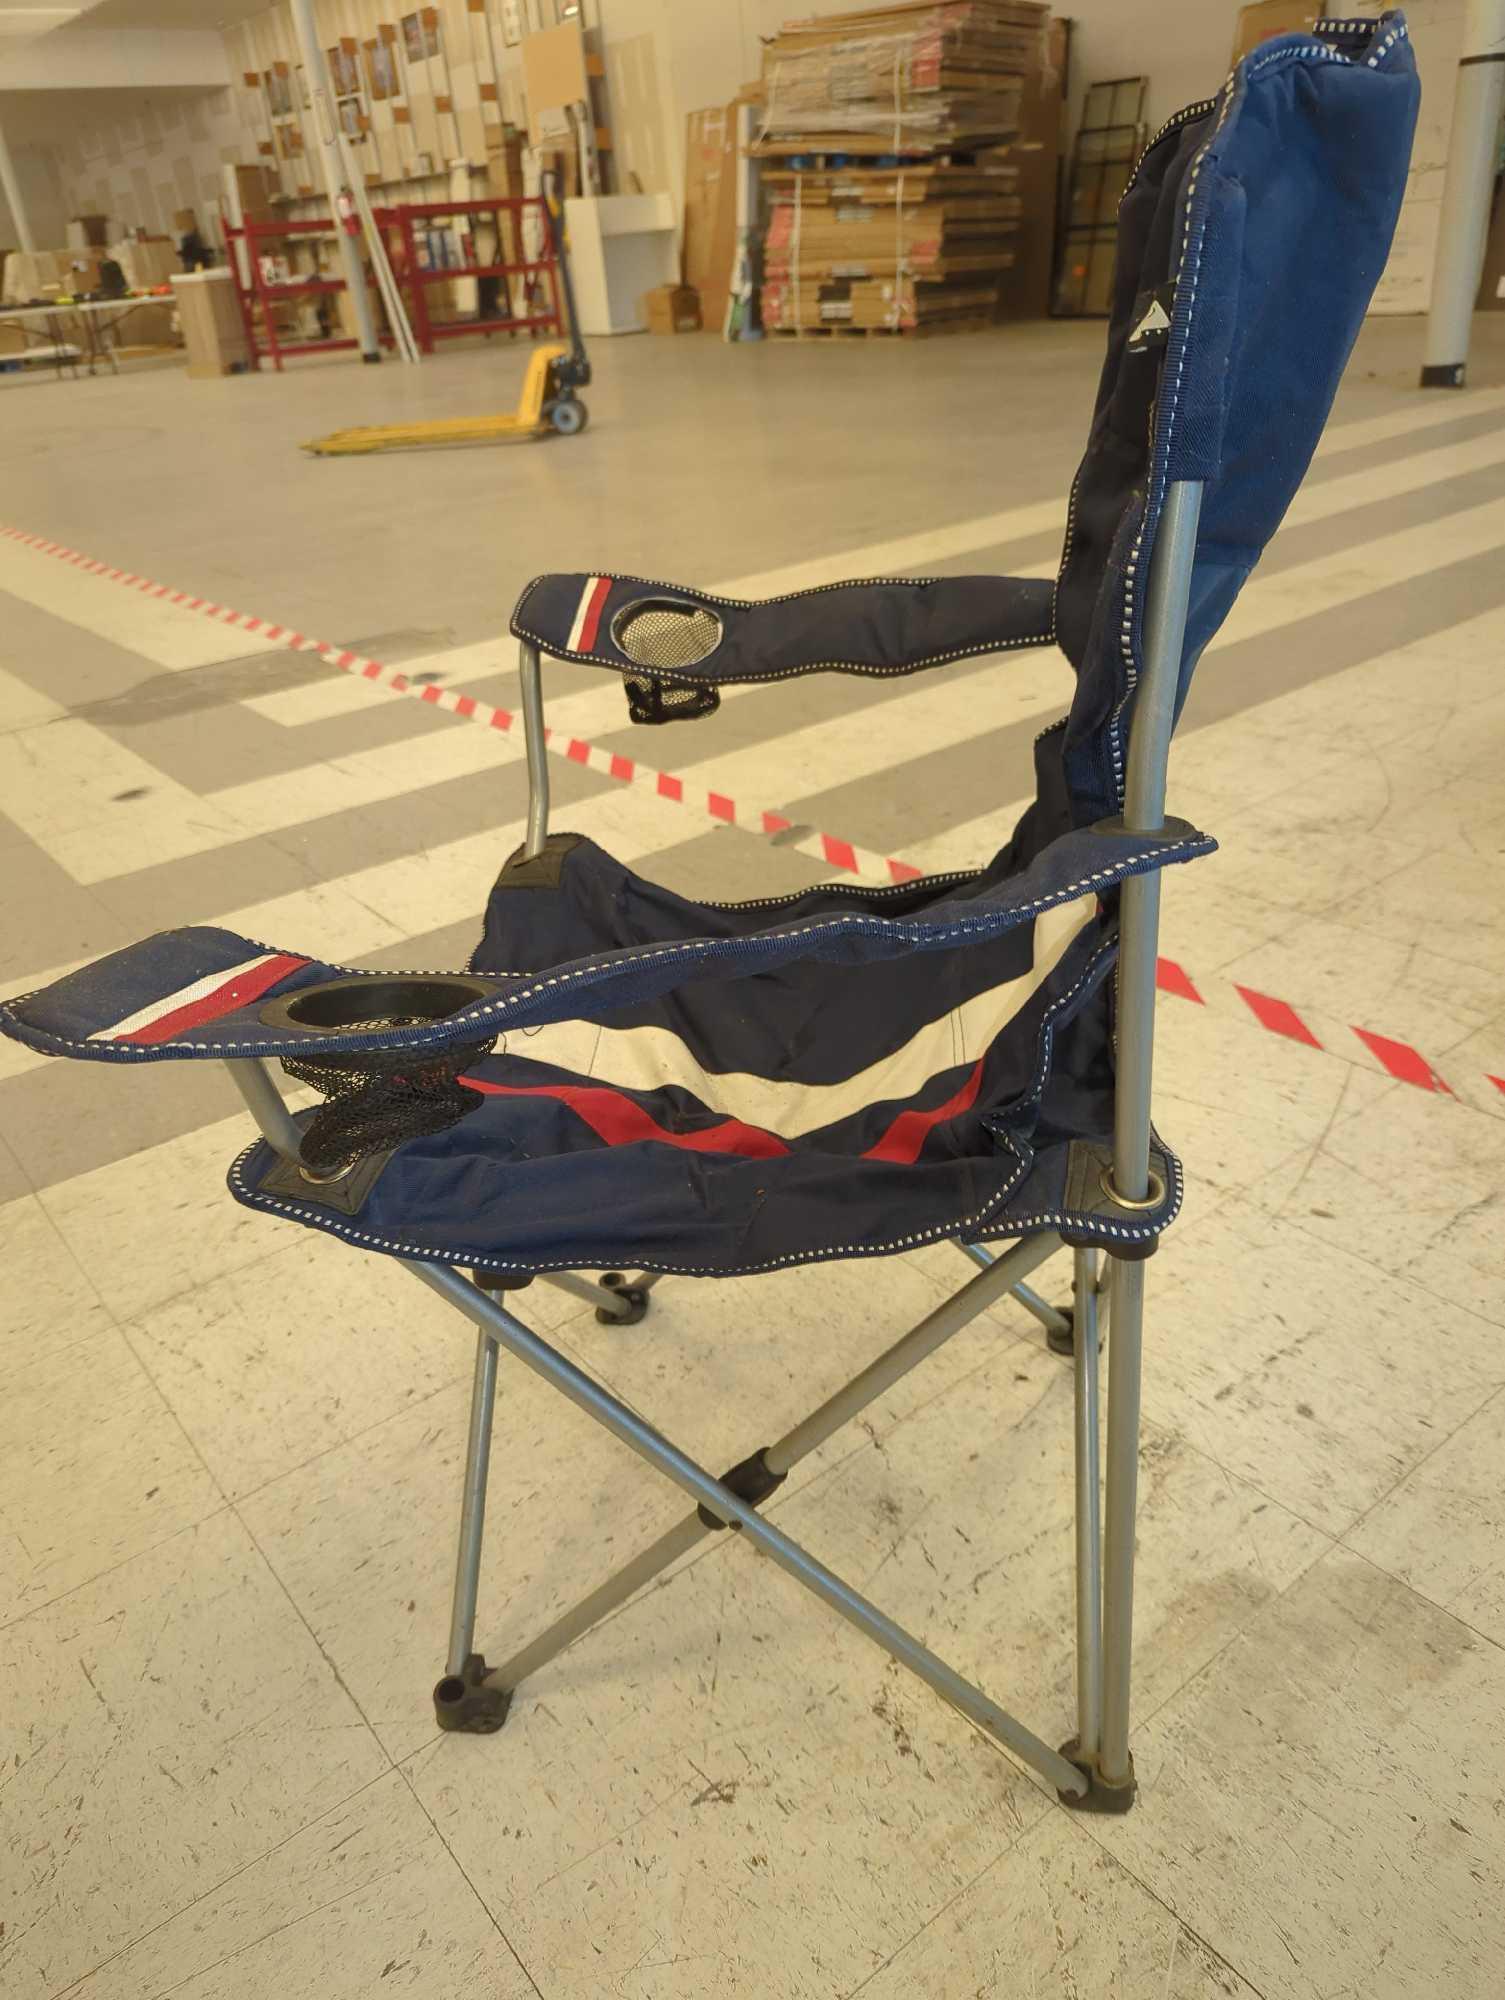 Lot of 2 Ozark Trail Patriot Lawn Chair with Double Cup Holders, Appears to be Used, What You See in